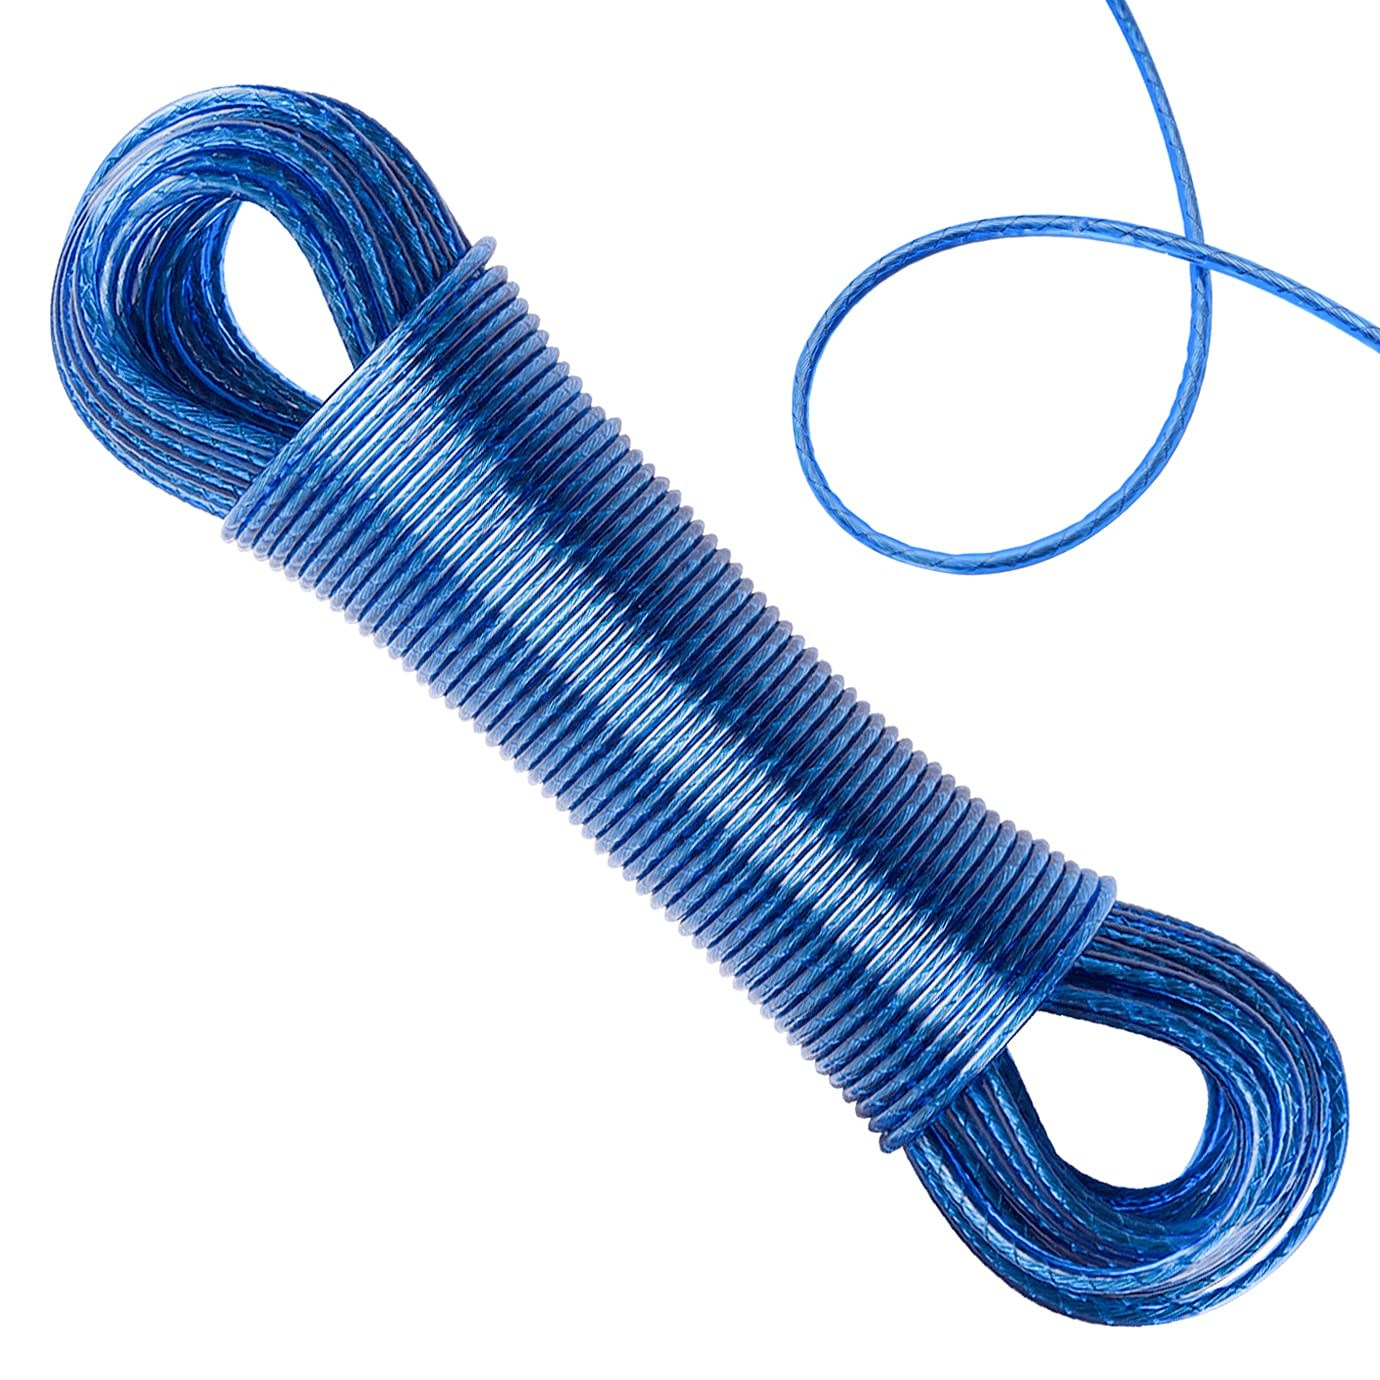 6MM Multi-Functional Thick Heavy Duty Hanging Cord String for Clothesline Hanging Drying Clothes Garden Camping Outdoors Travel 100 Foot Nylon Rope 